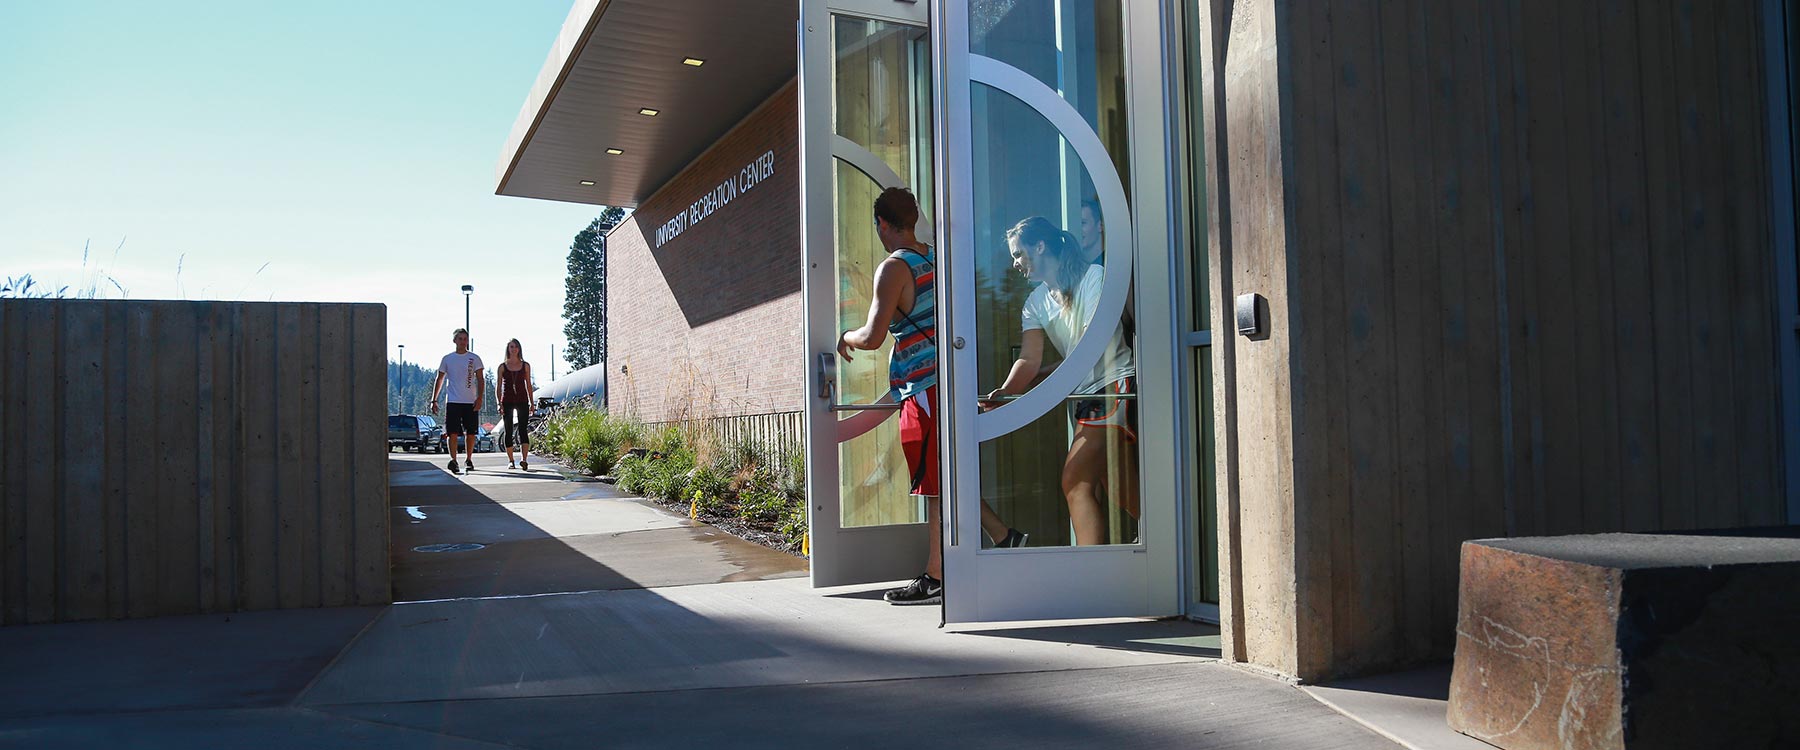 Two students push open the doors of the U-Rec, a modern building with glass doors, as they leave.